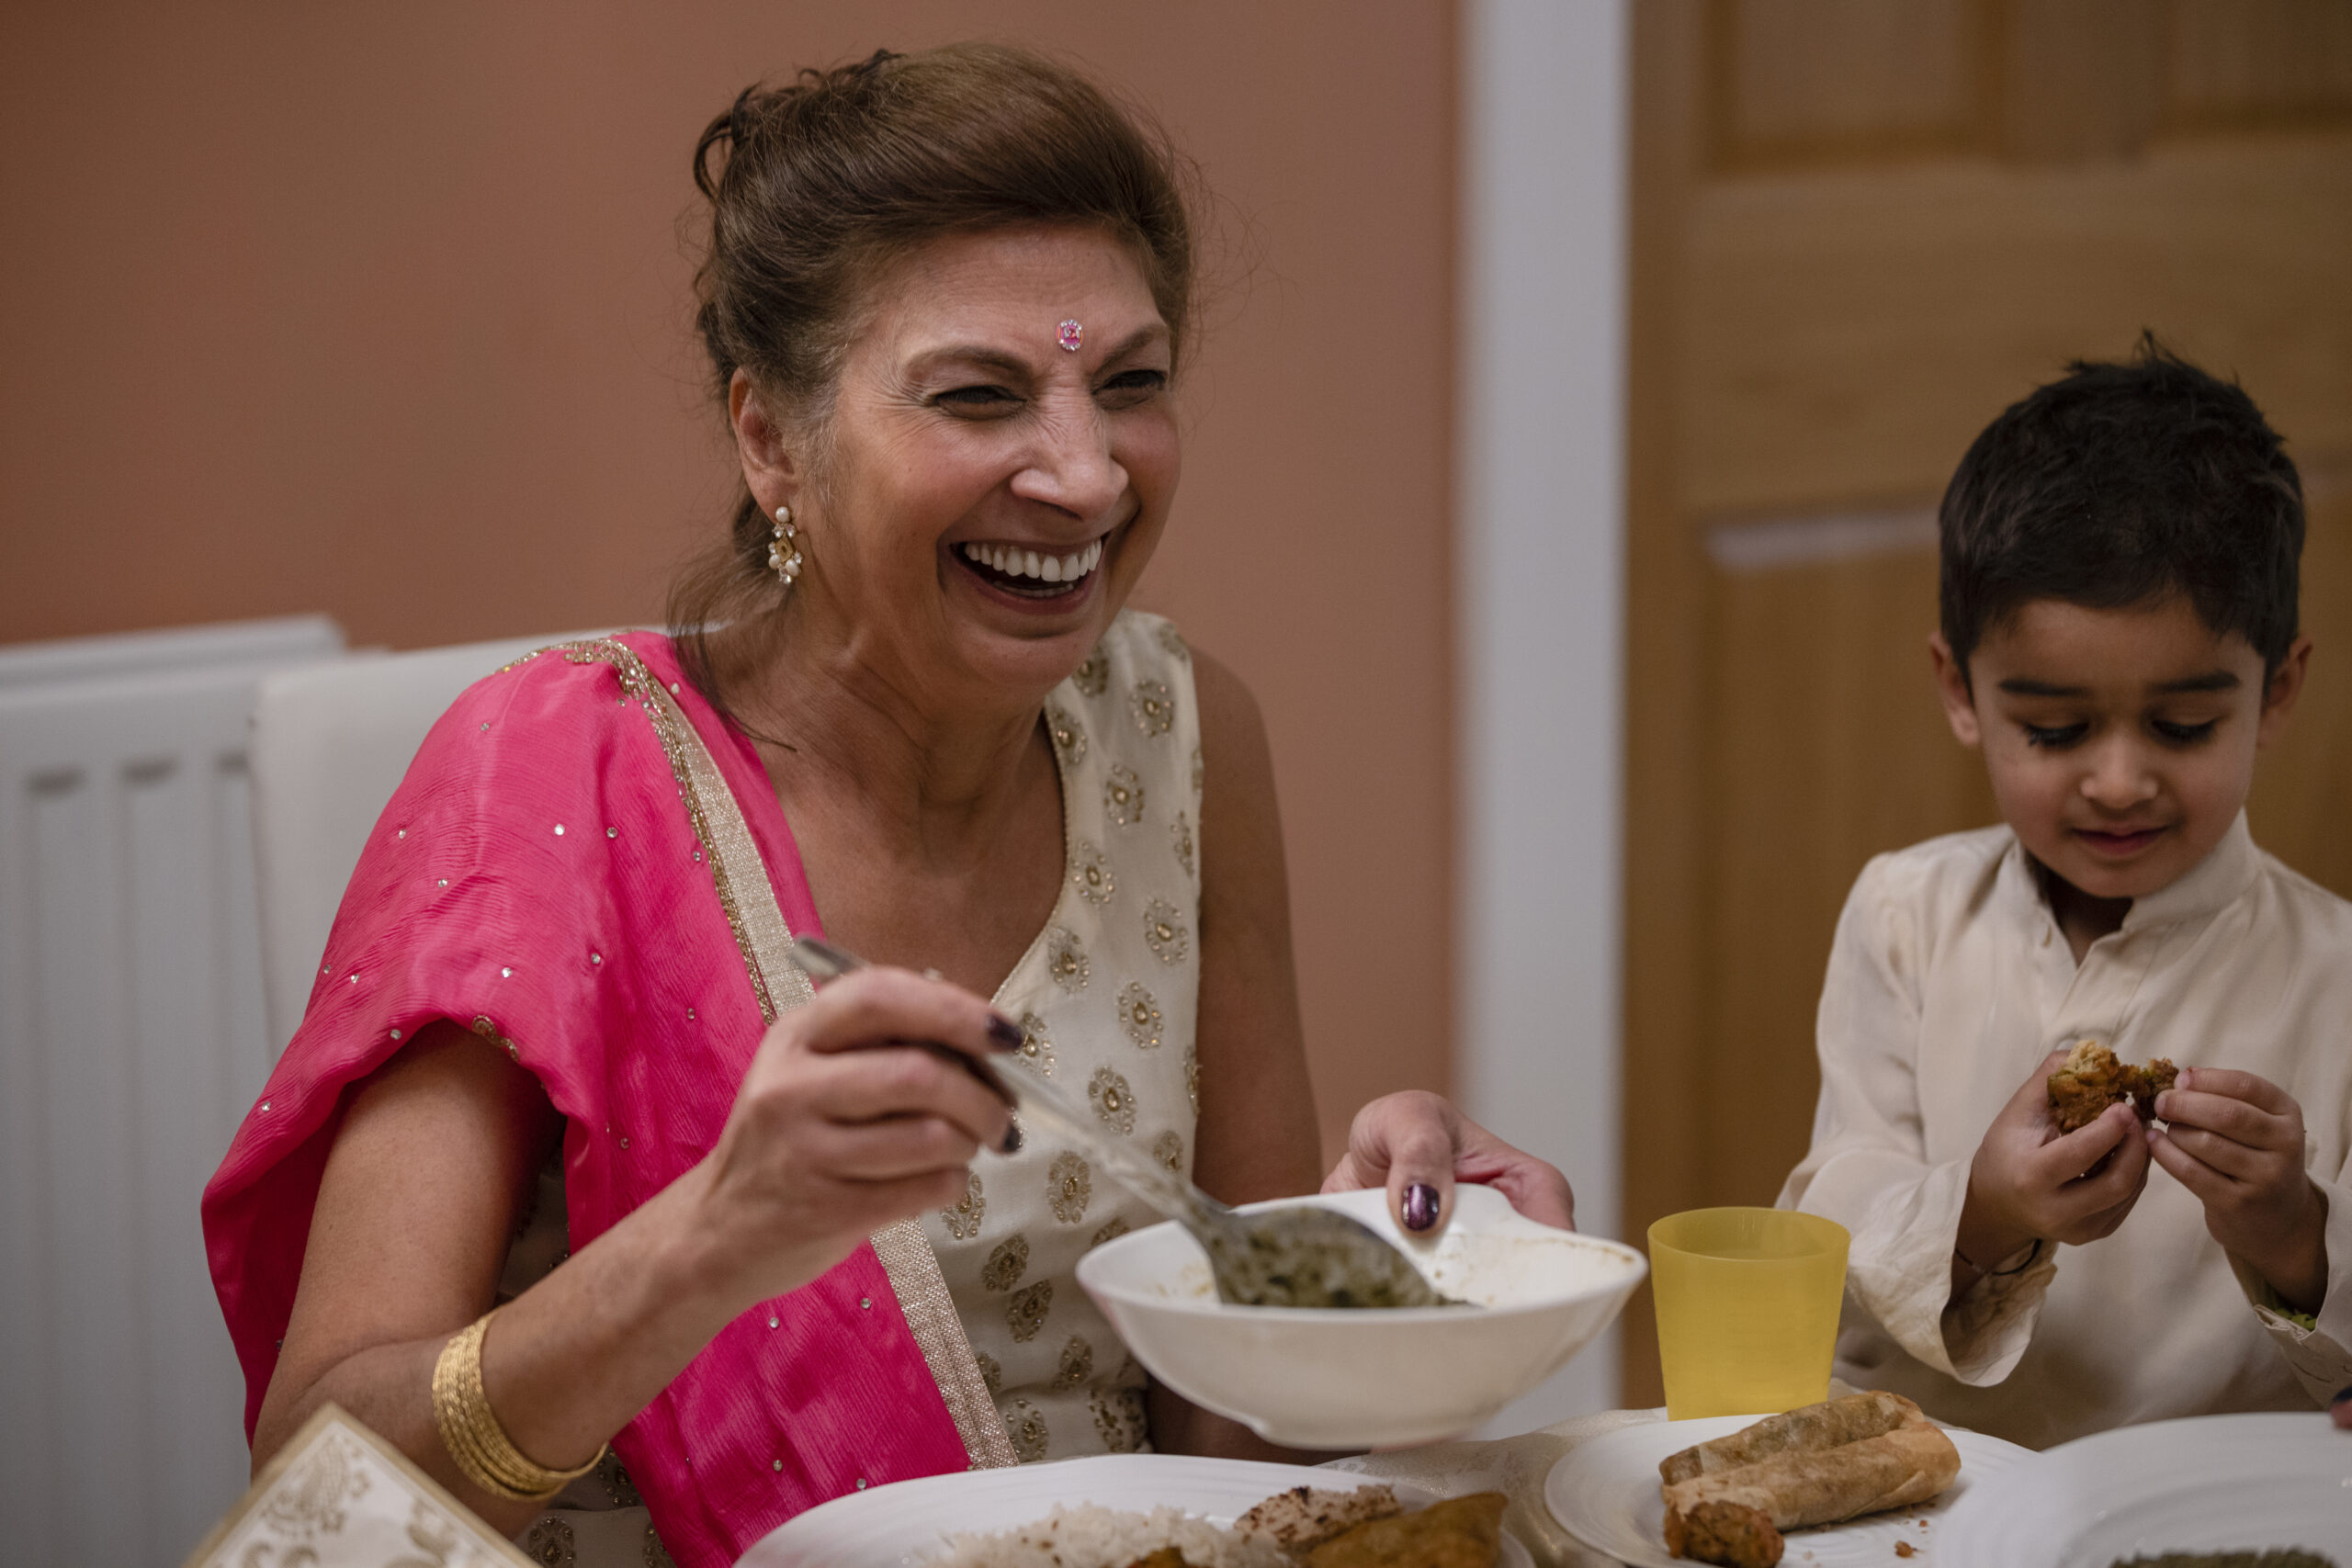 A close-up front view of a cheerful happy grandmother sitting next to her grandson as they sit down for a family meal to celebrate Diwali as a family by having lots of tasty home-cooked traditional foods.